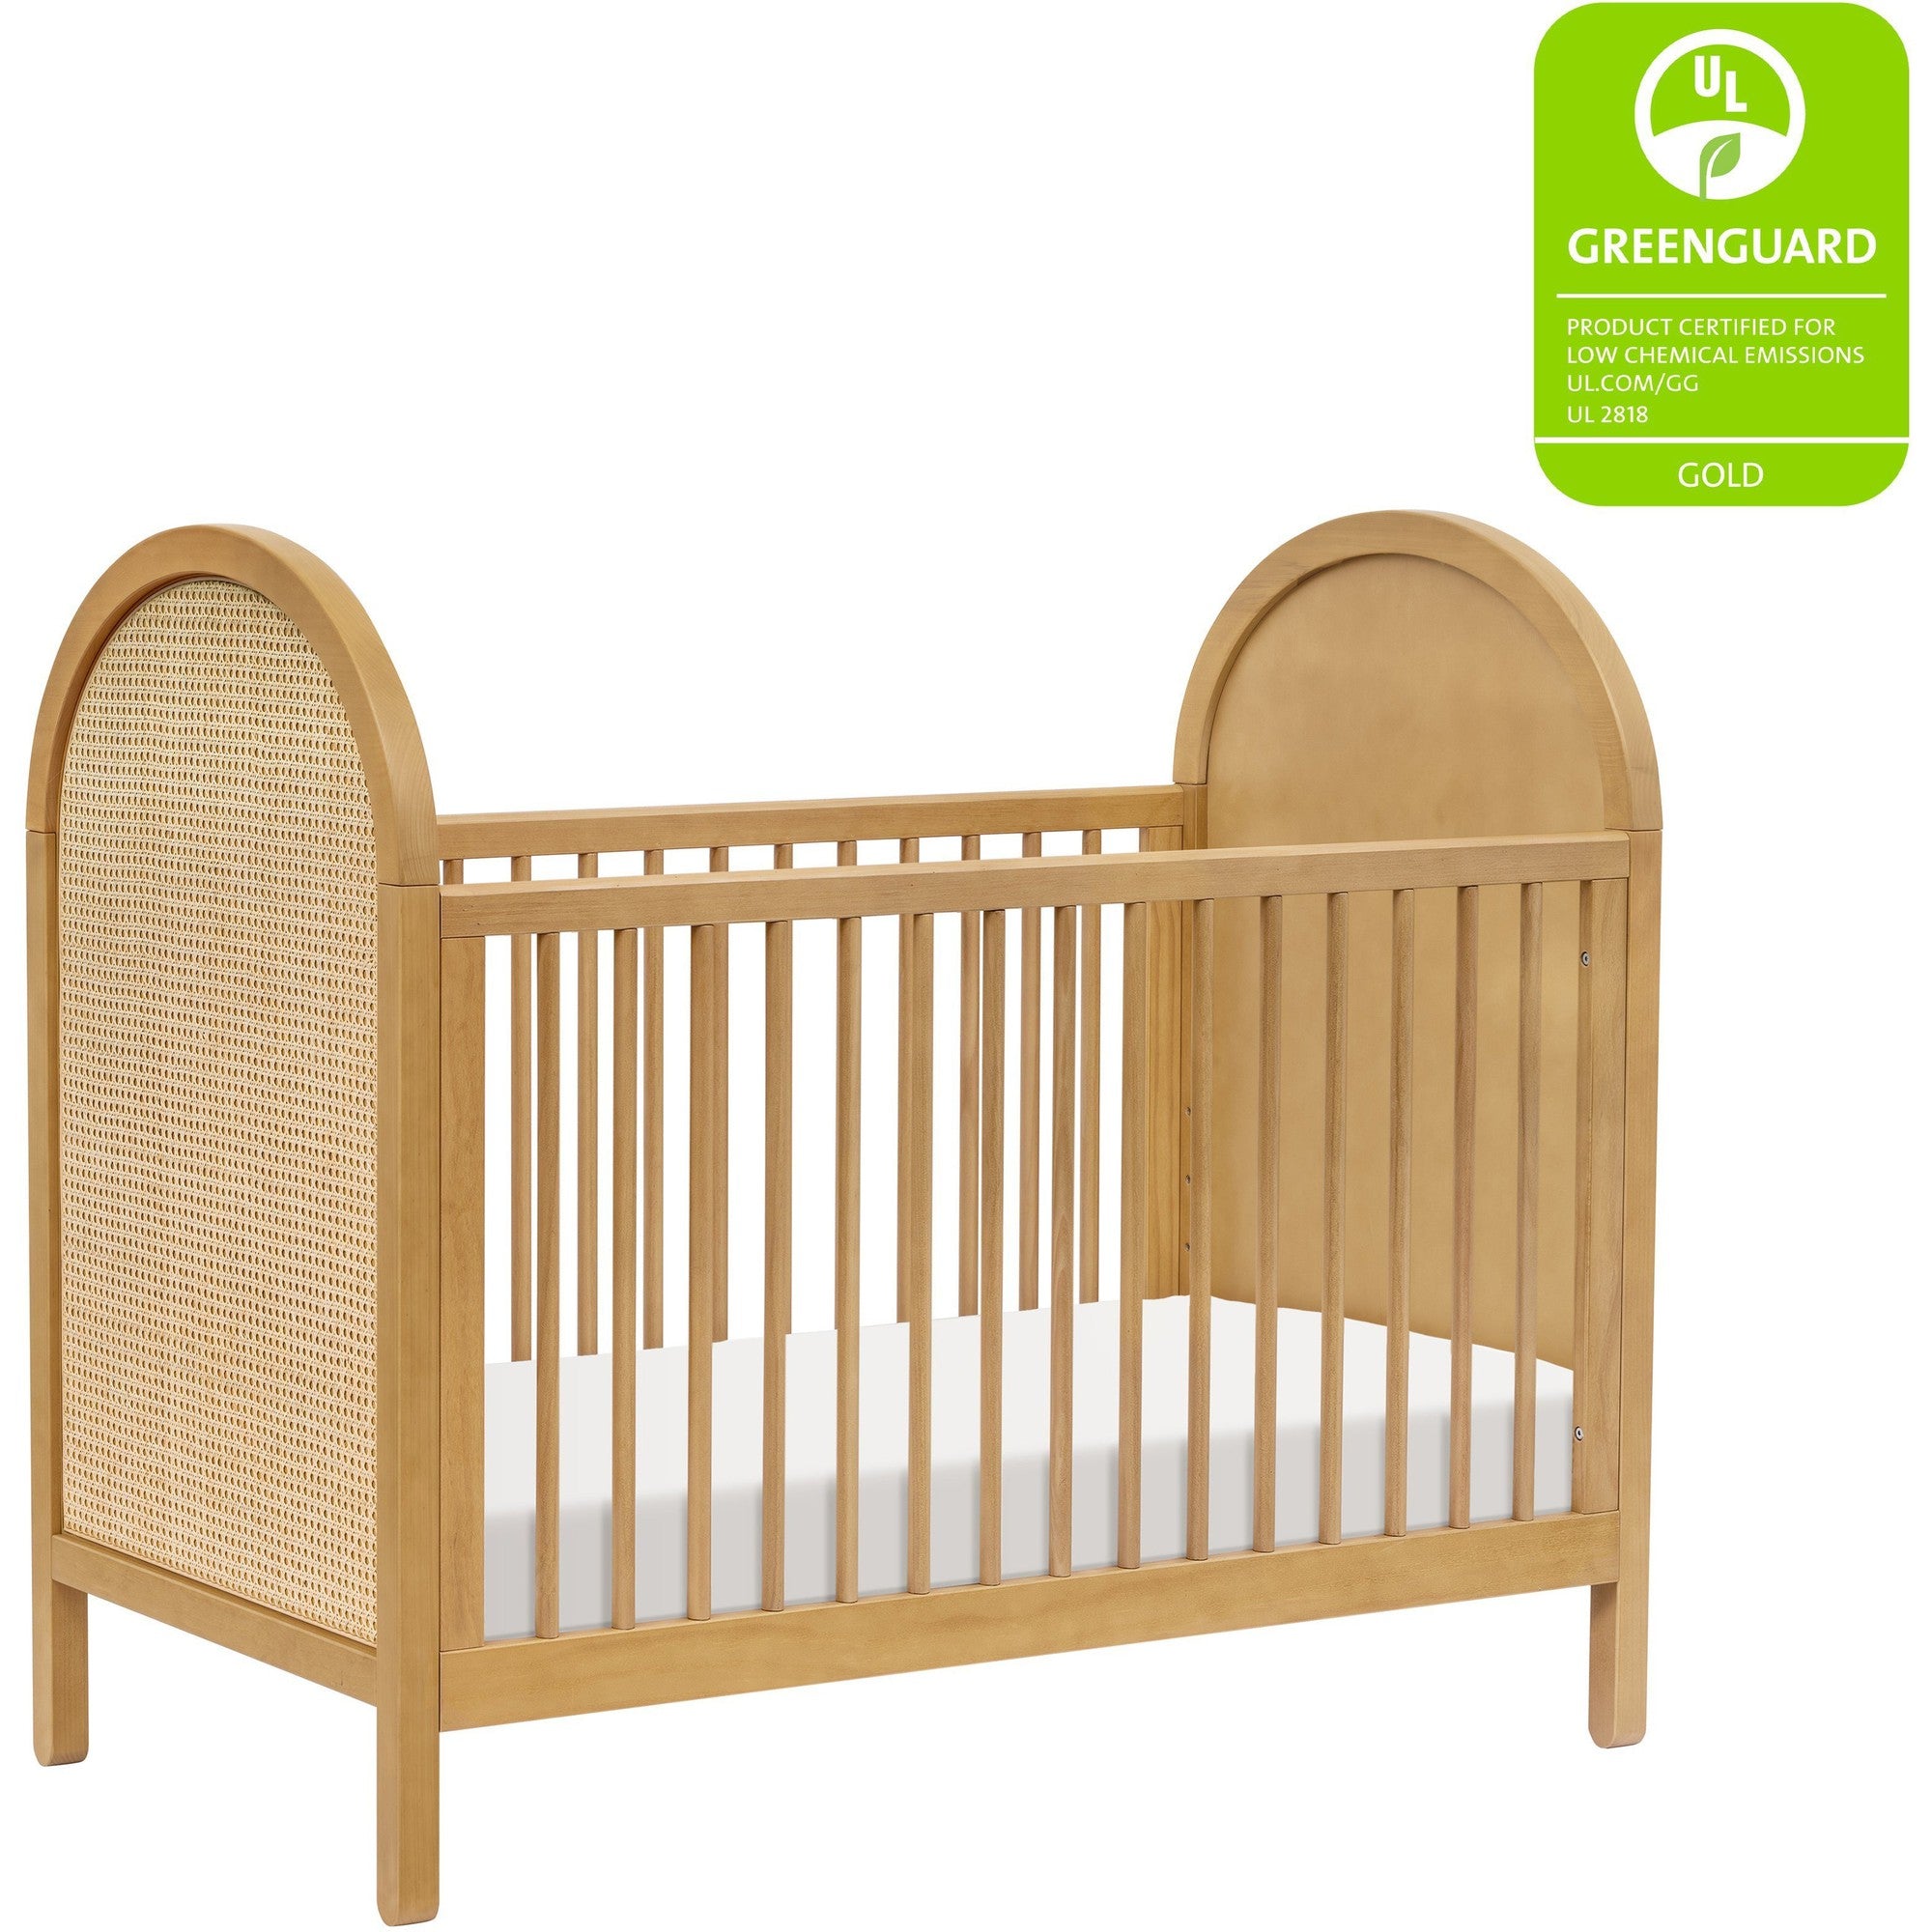 Babyletto Bondi Cane 3-in-1 Convertible Crib with Toddler Bed Kit